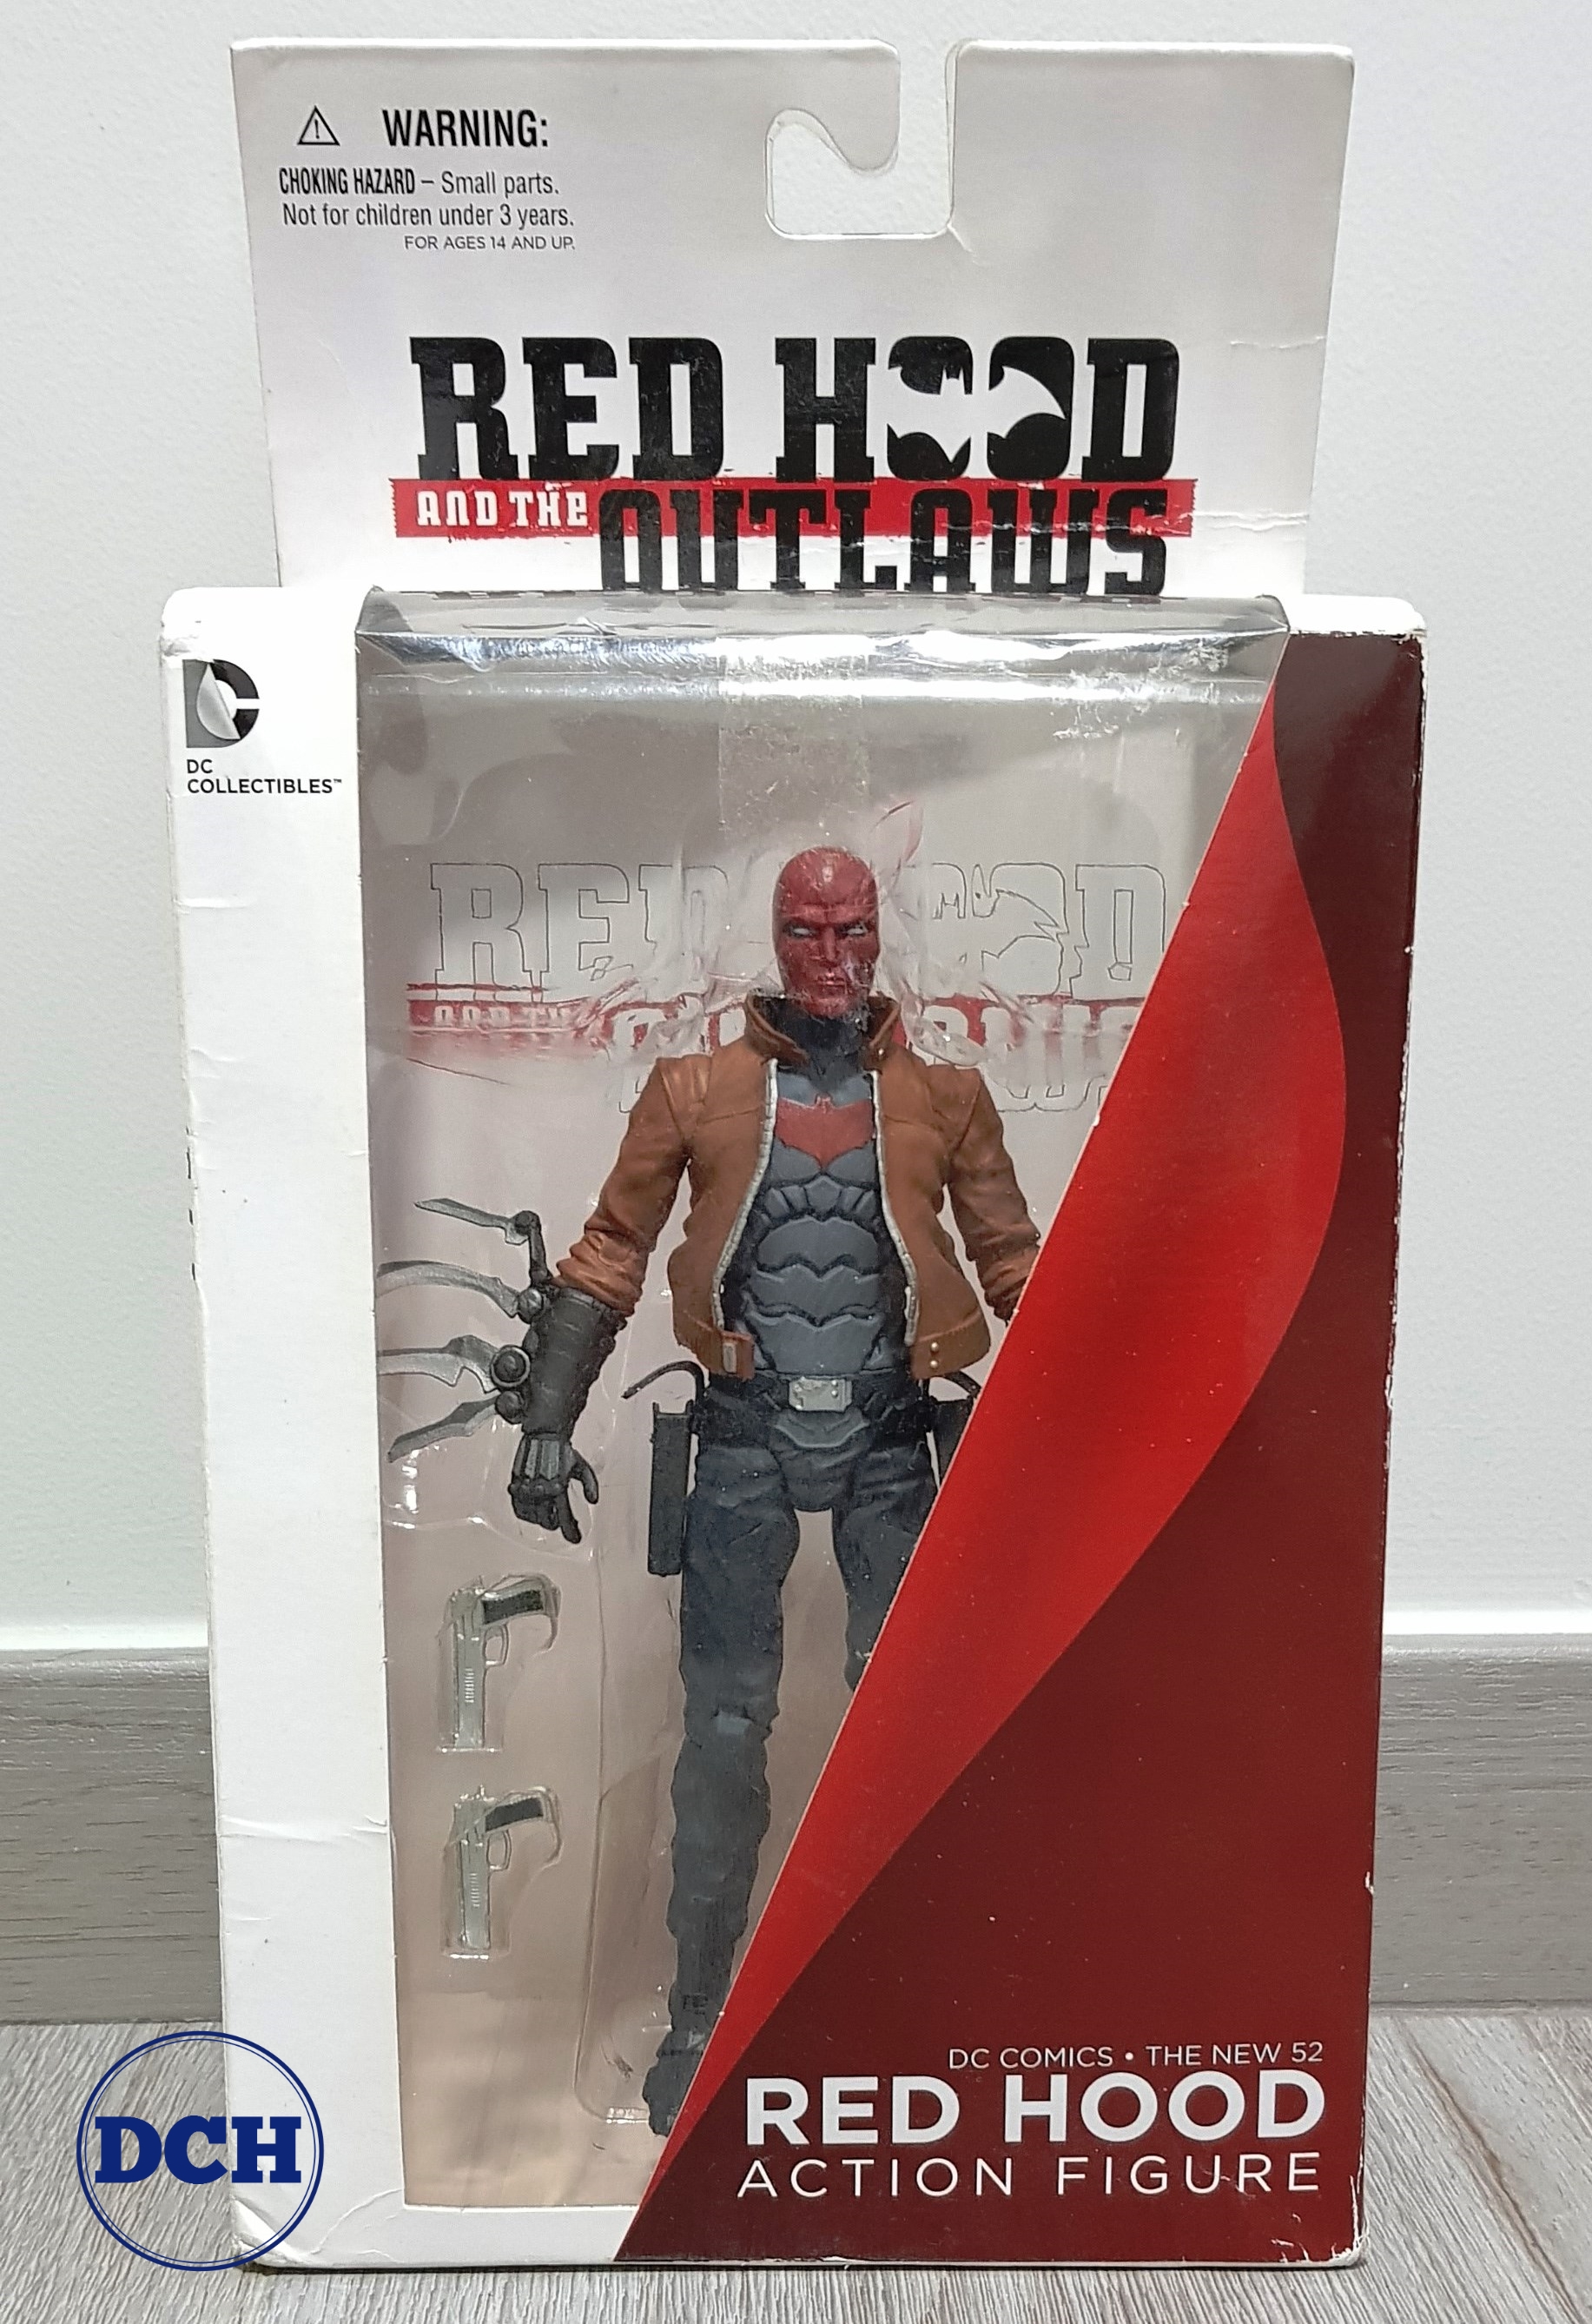 dc collectibles red hood